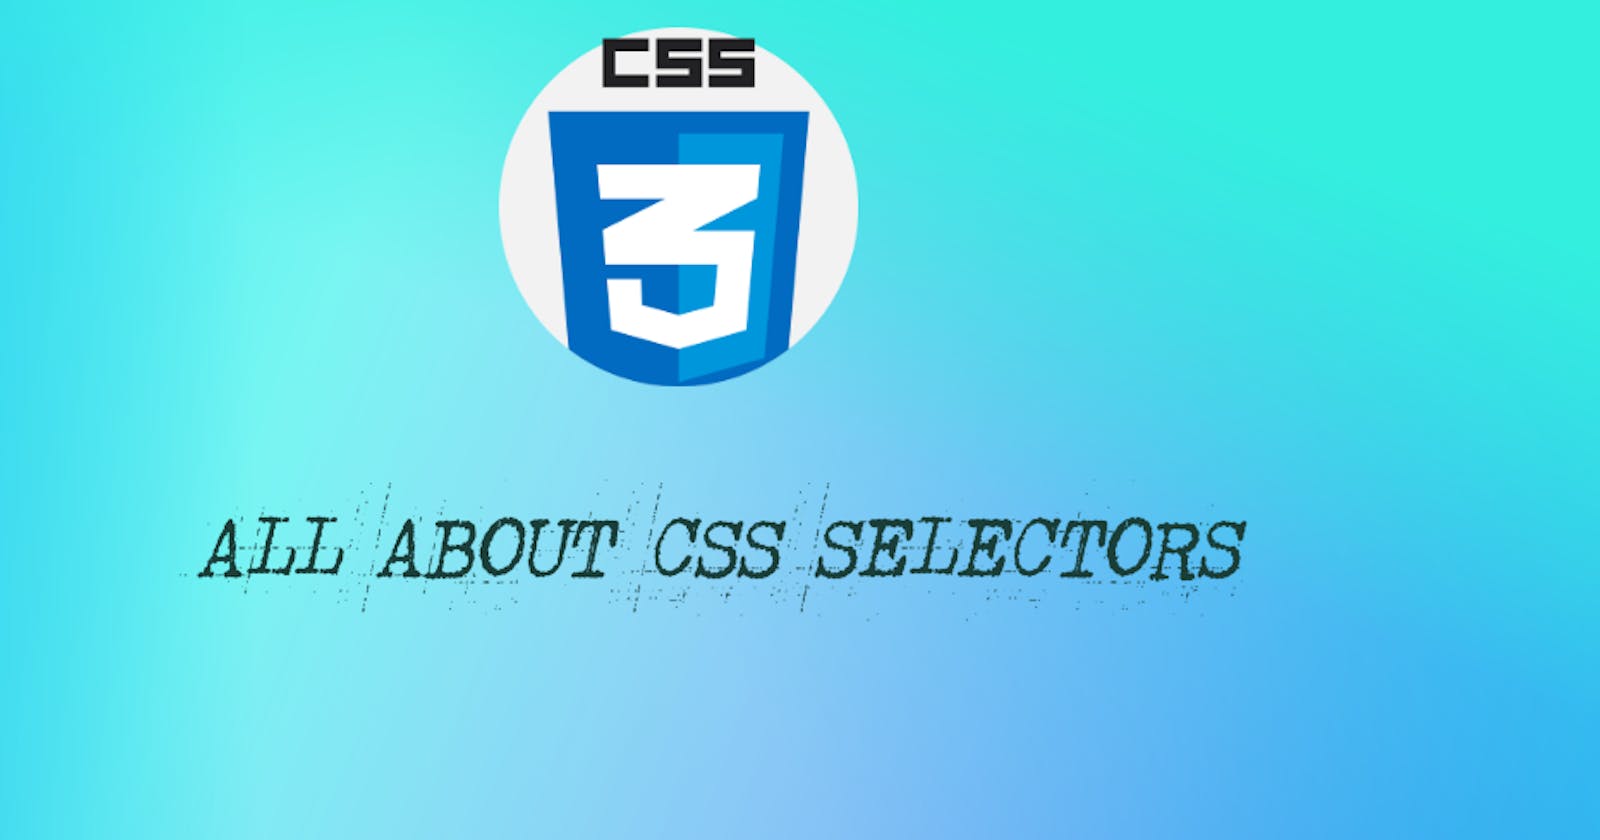 All about CSS Selectors